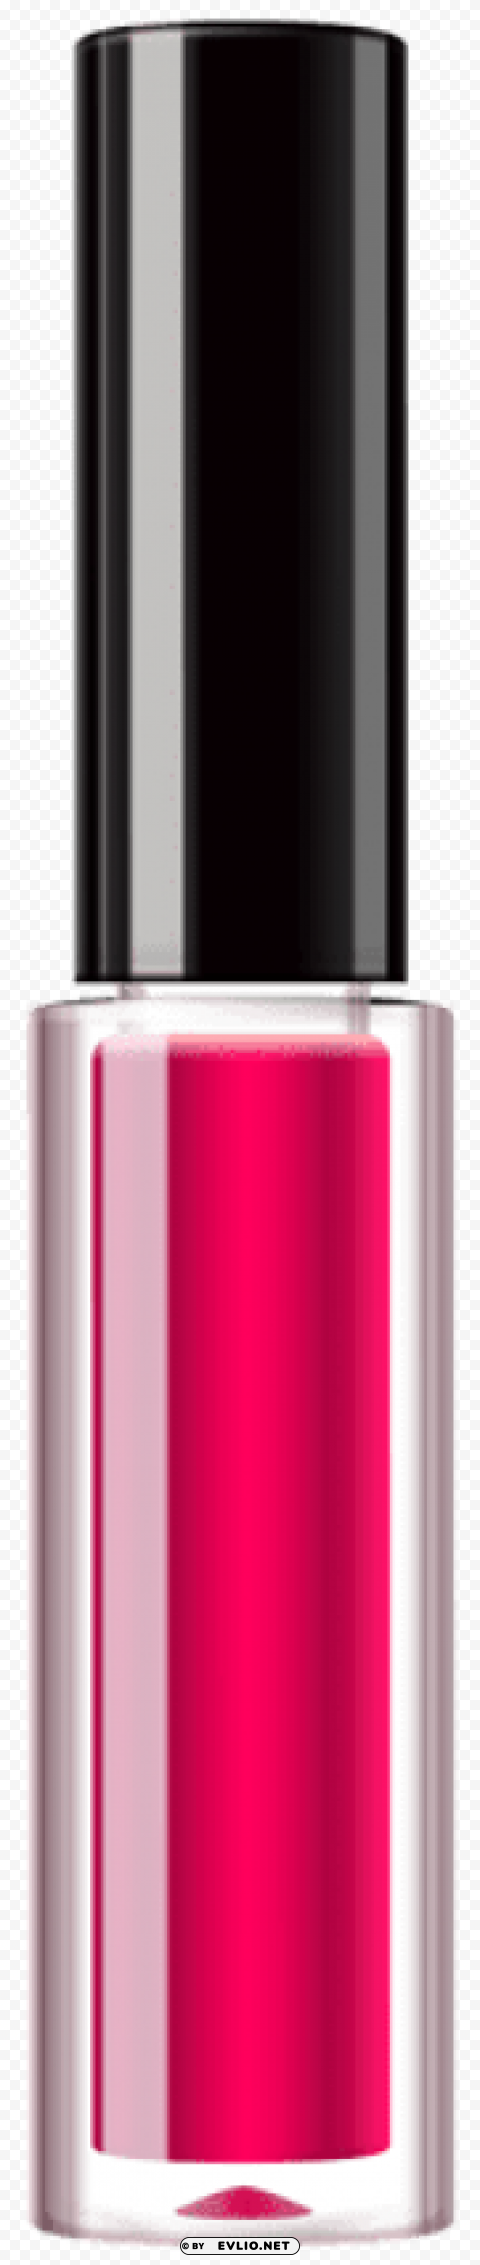 liquid lipstick transparent Isolated Character on HighResolution PNG